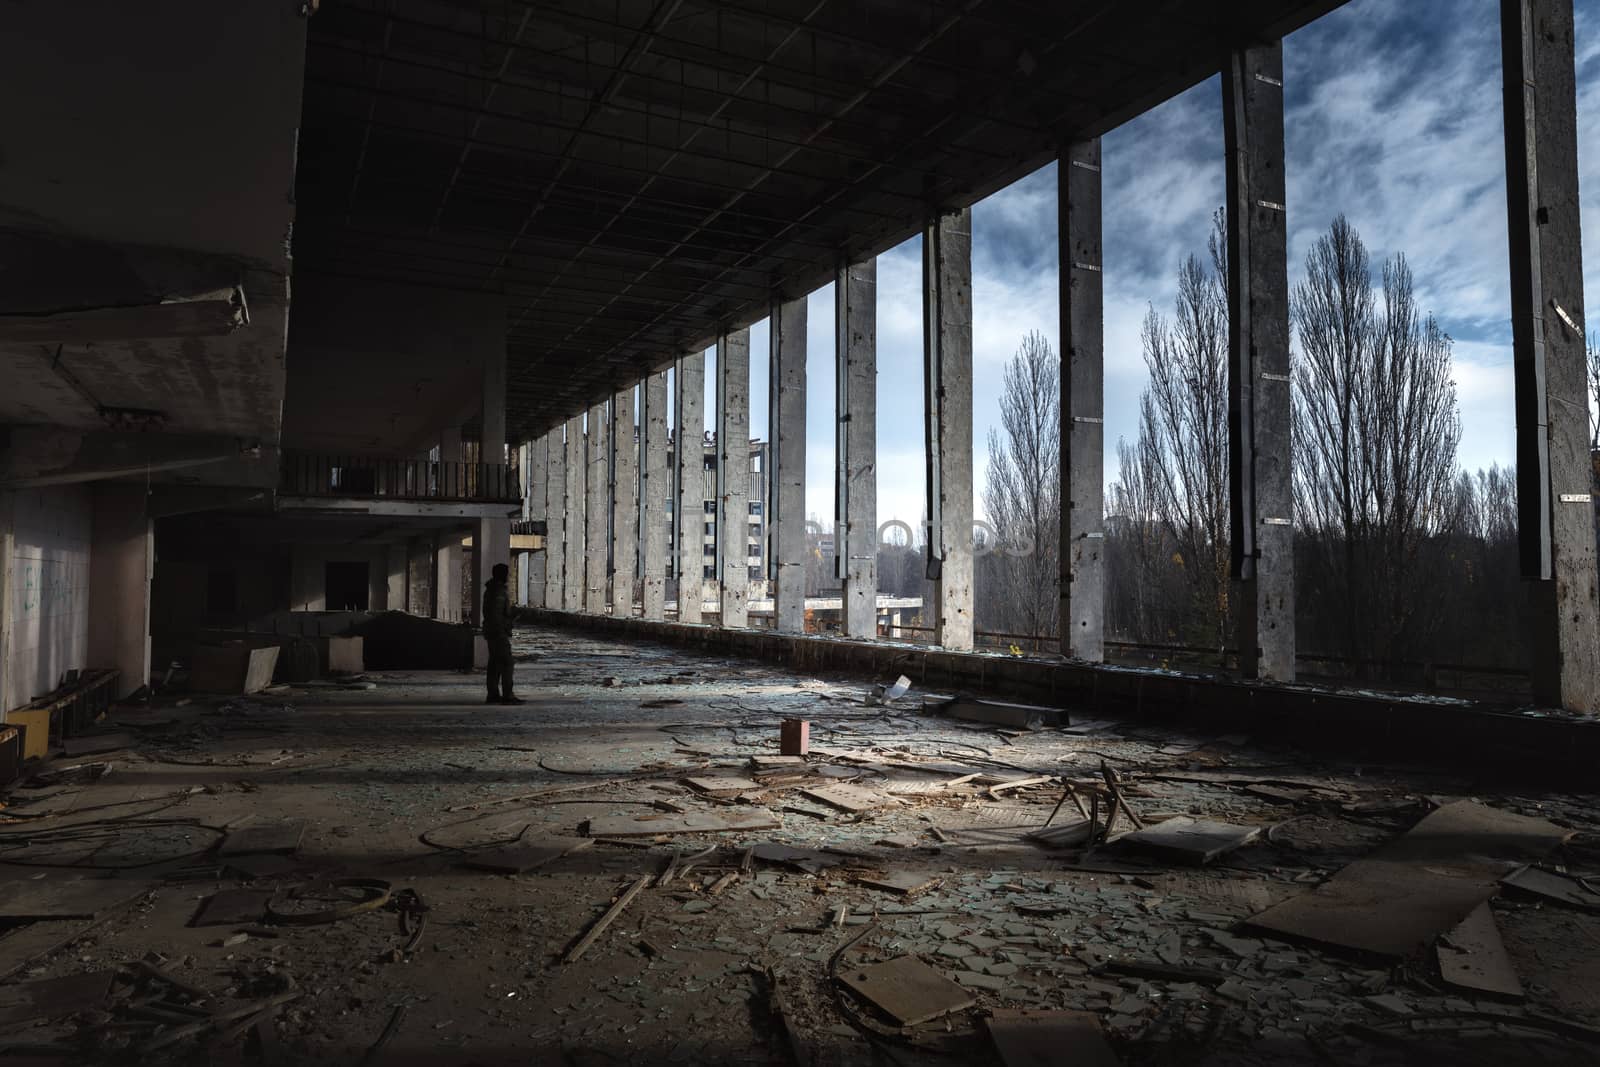 Large hall in Pripyat city center, Chernobyl Exclusion Zone 2019 by svedoliver